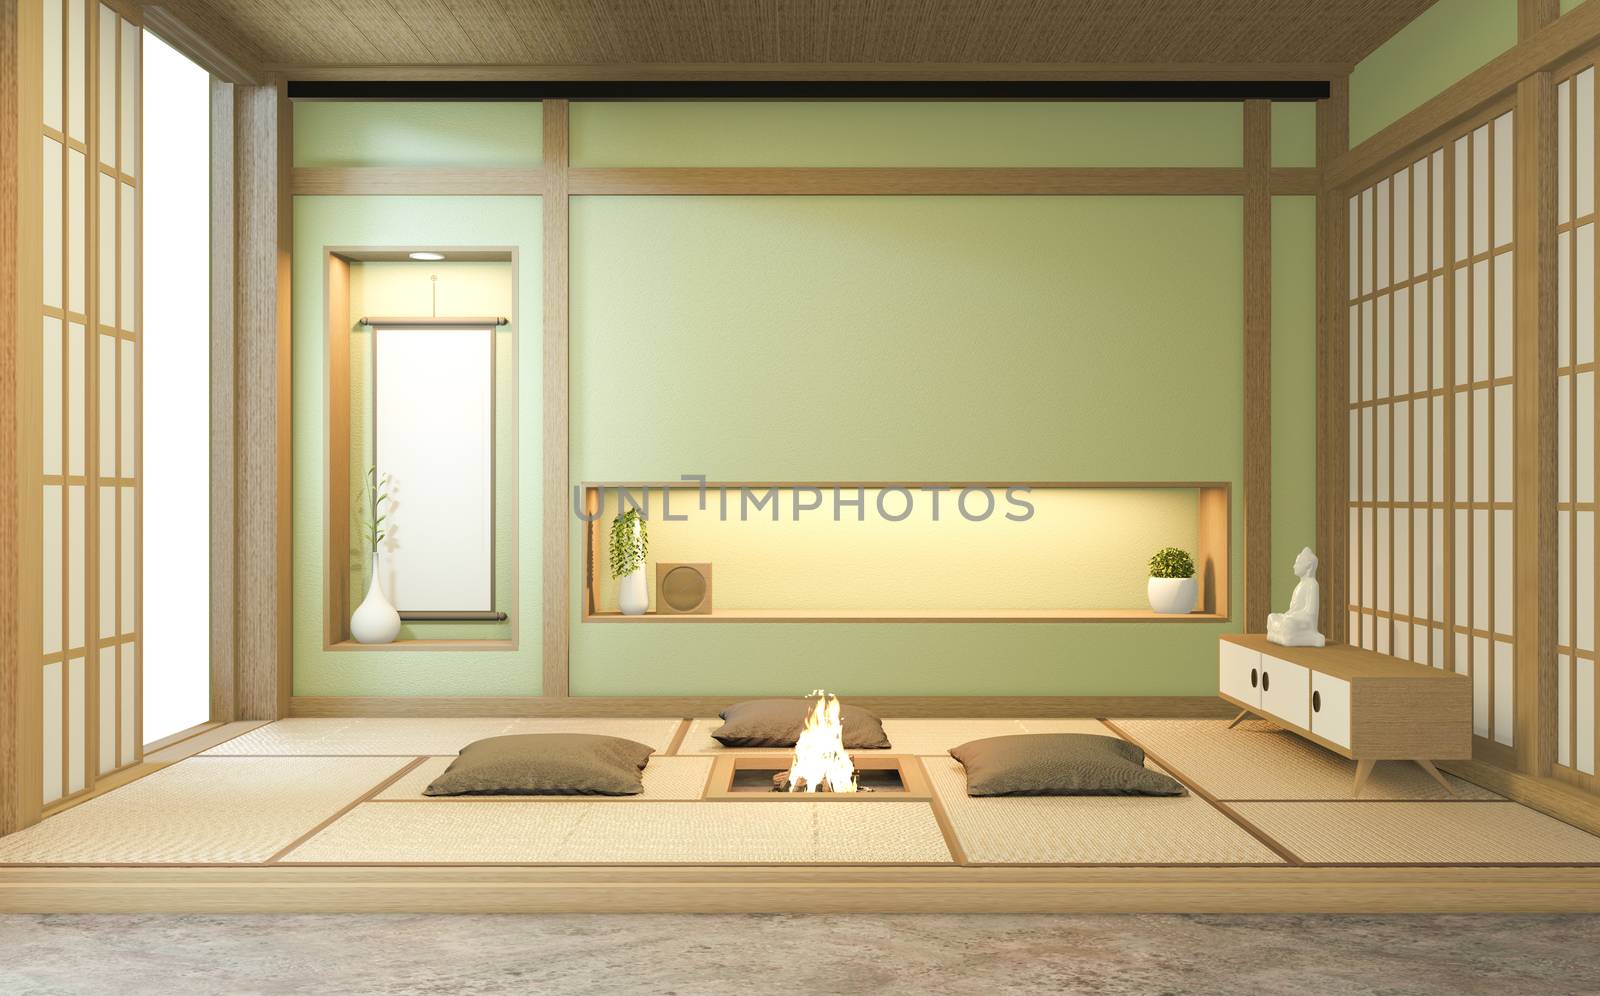 Nihon green room design interior with door paper and cabinet she by Minny0012011@hotmail.com